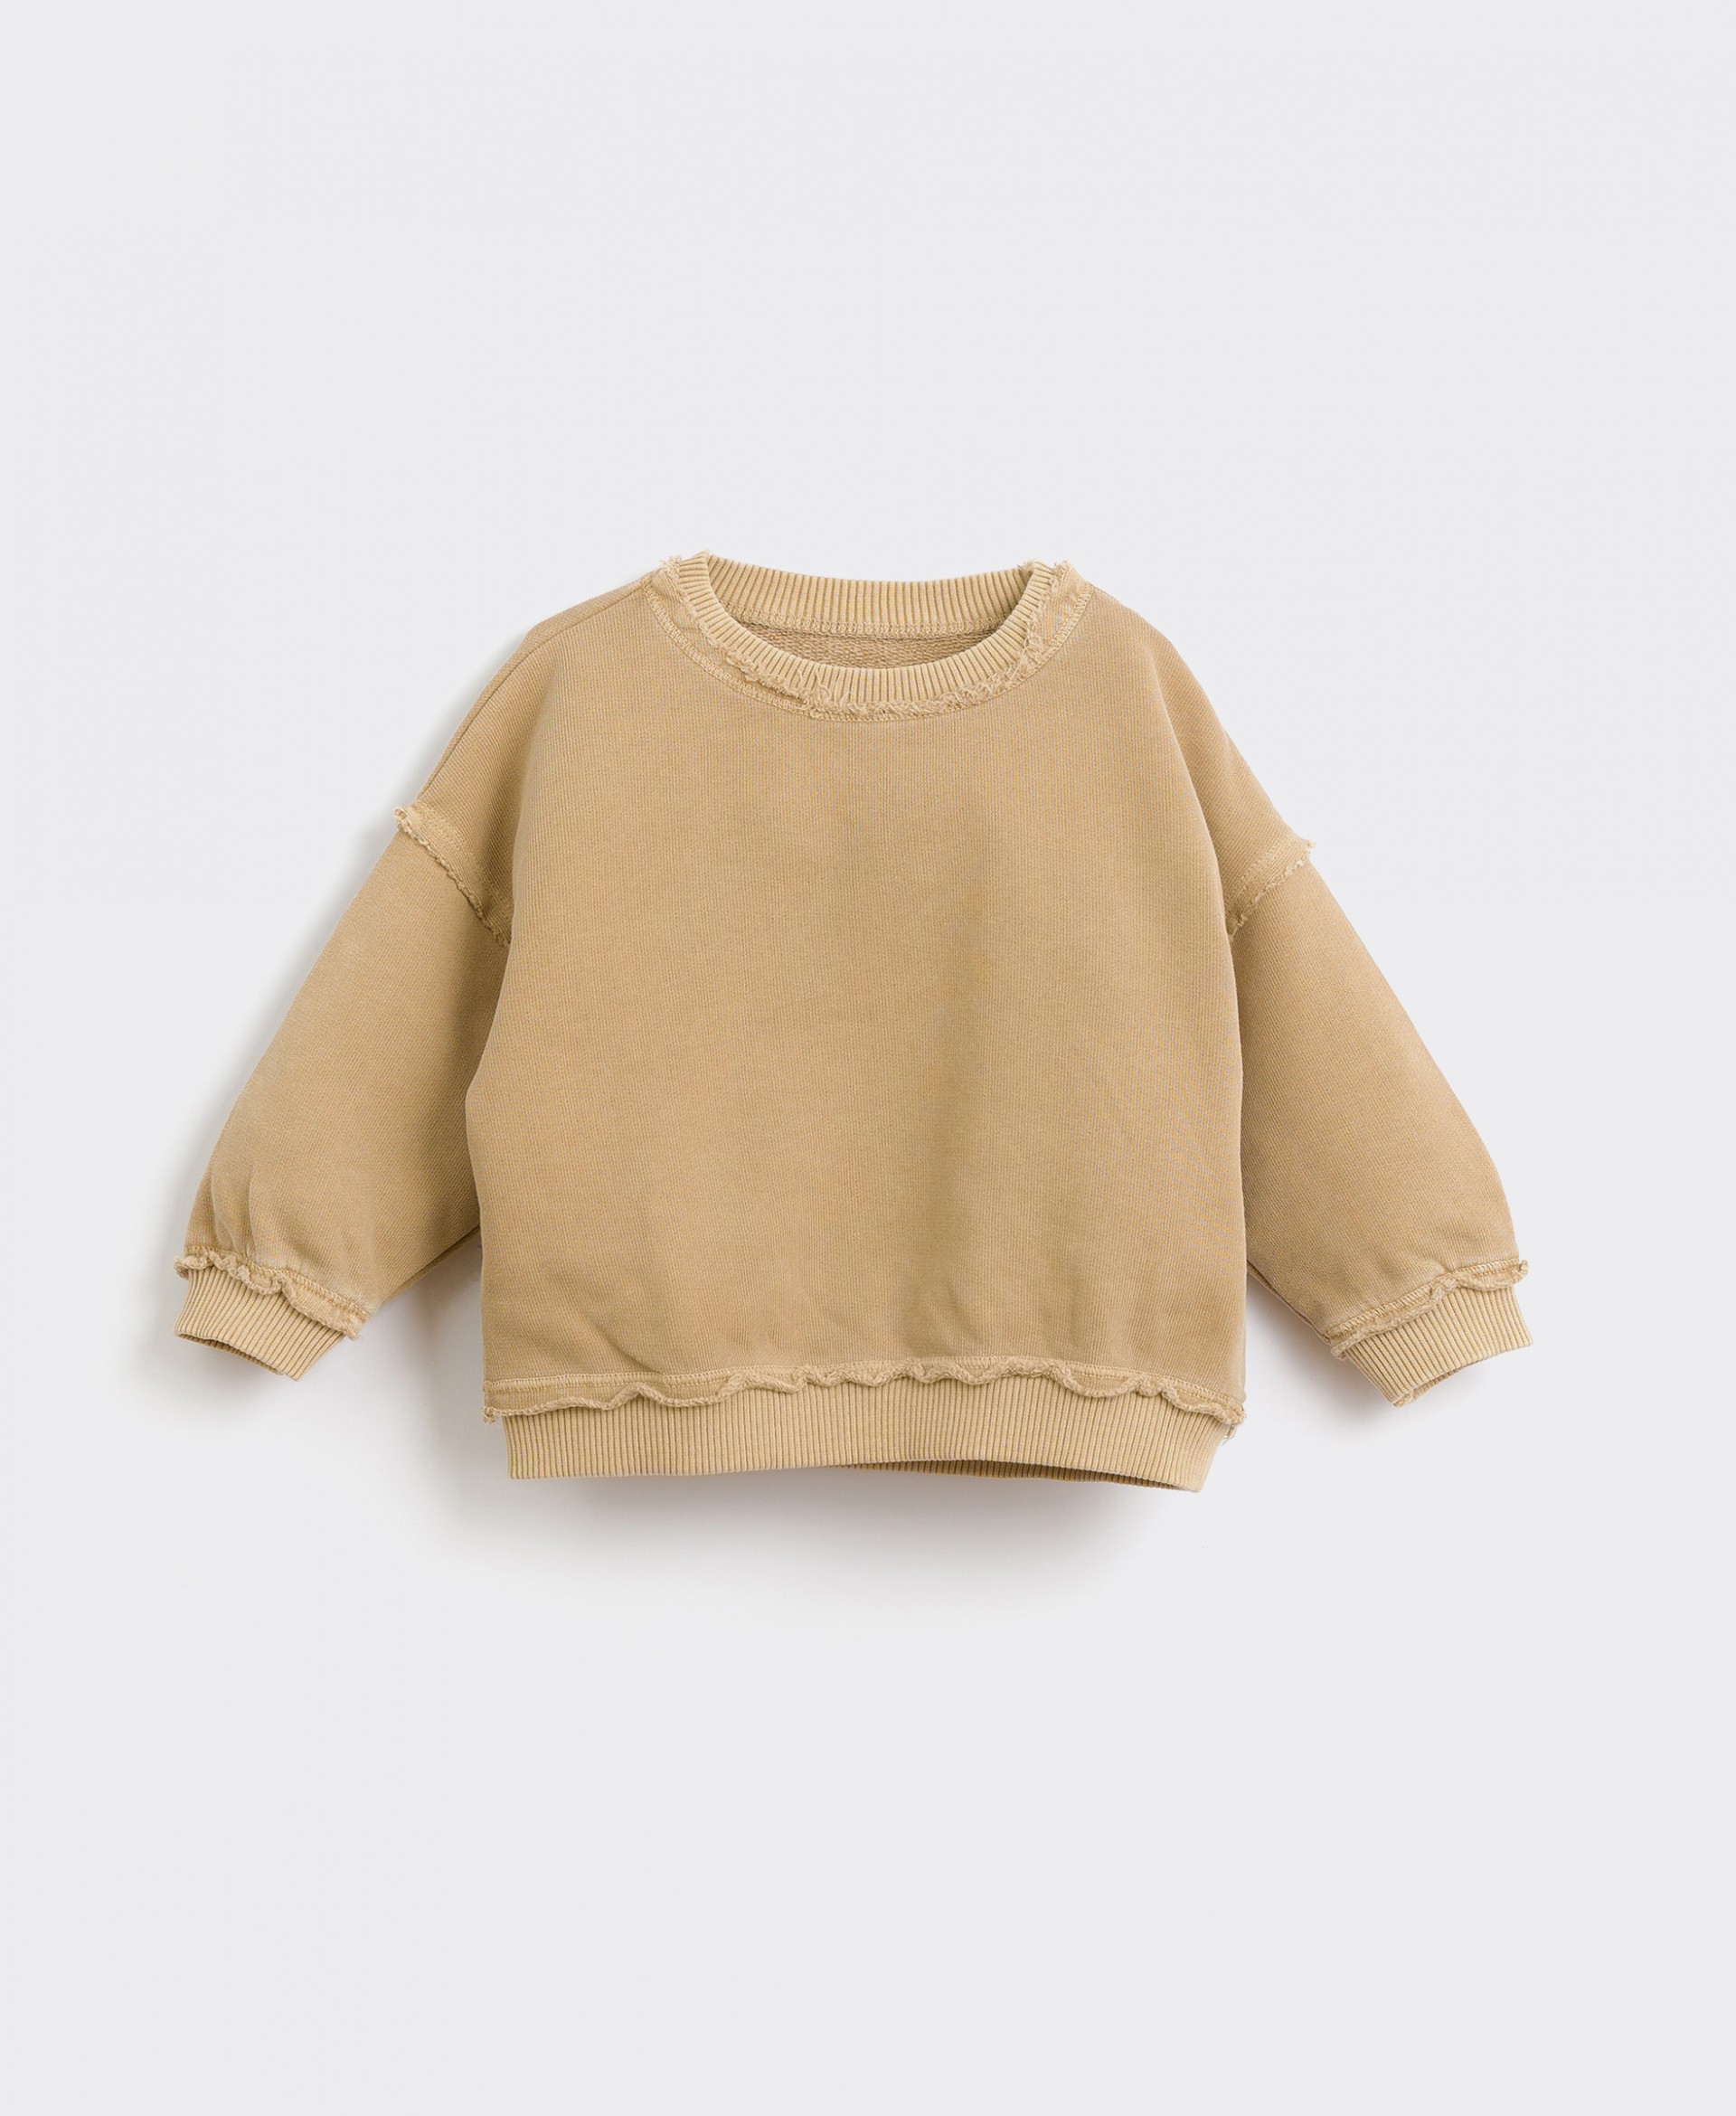 Naturally dyed jersey | Culinary